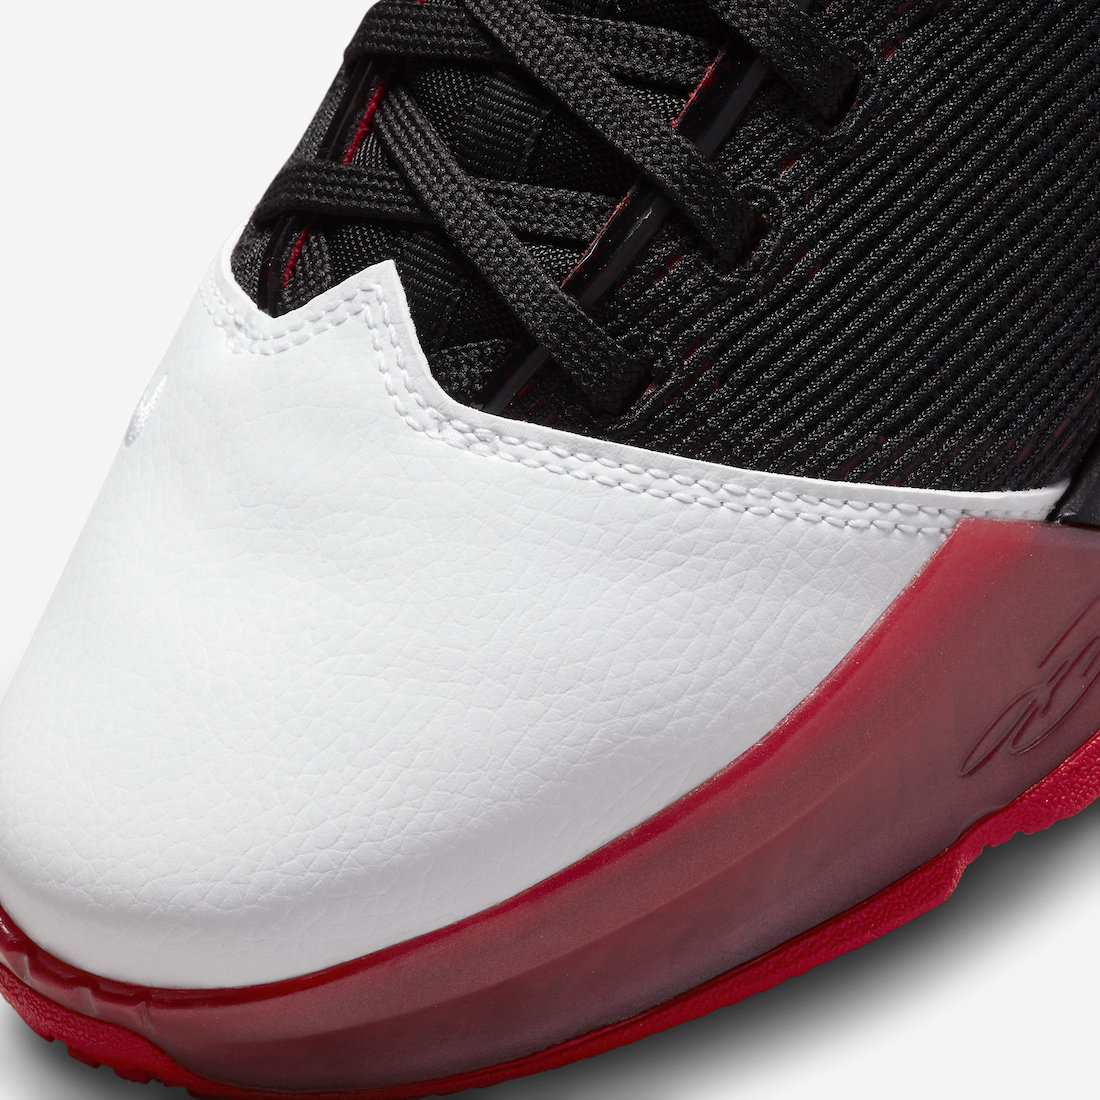 Nike-LeBron-19-Low-Bred-DH1270-001-Release-Date-6